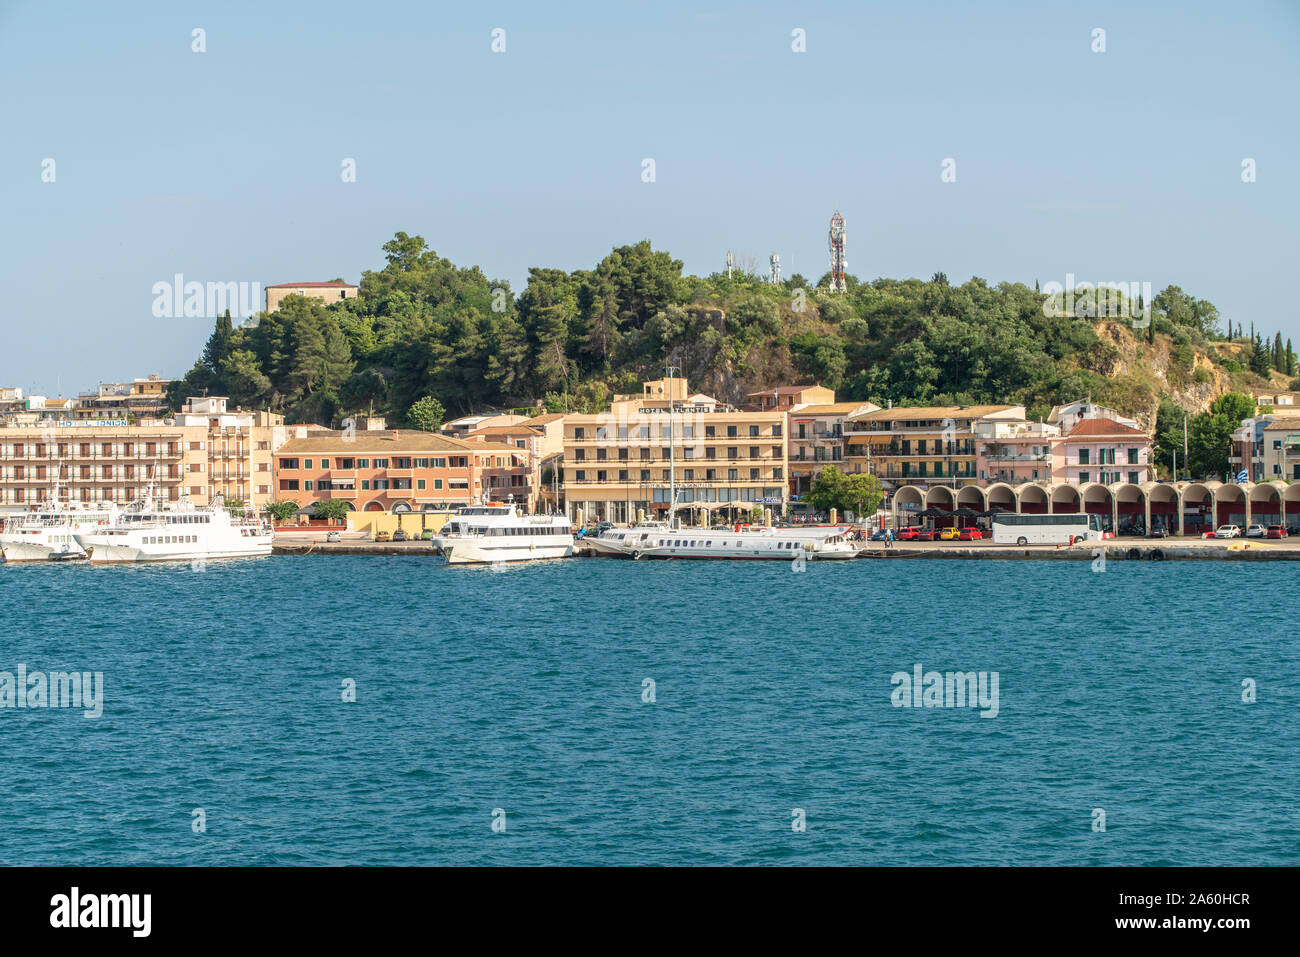 Ships moored at harbor against clear sky in Corfu, Greece Stock Photo